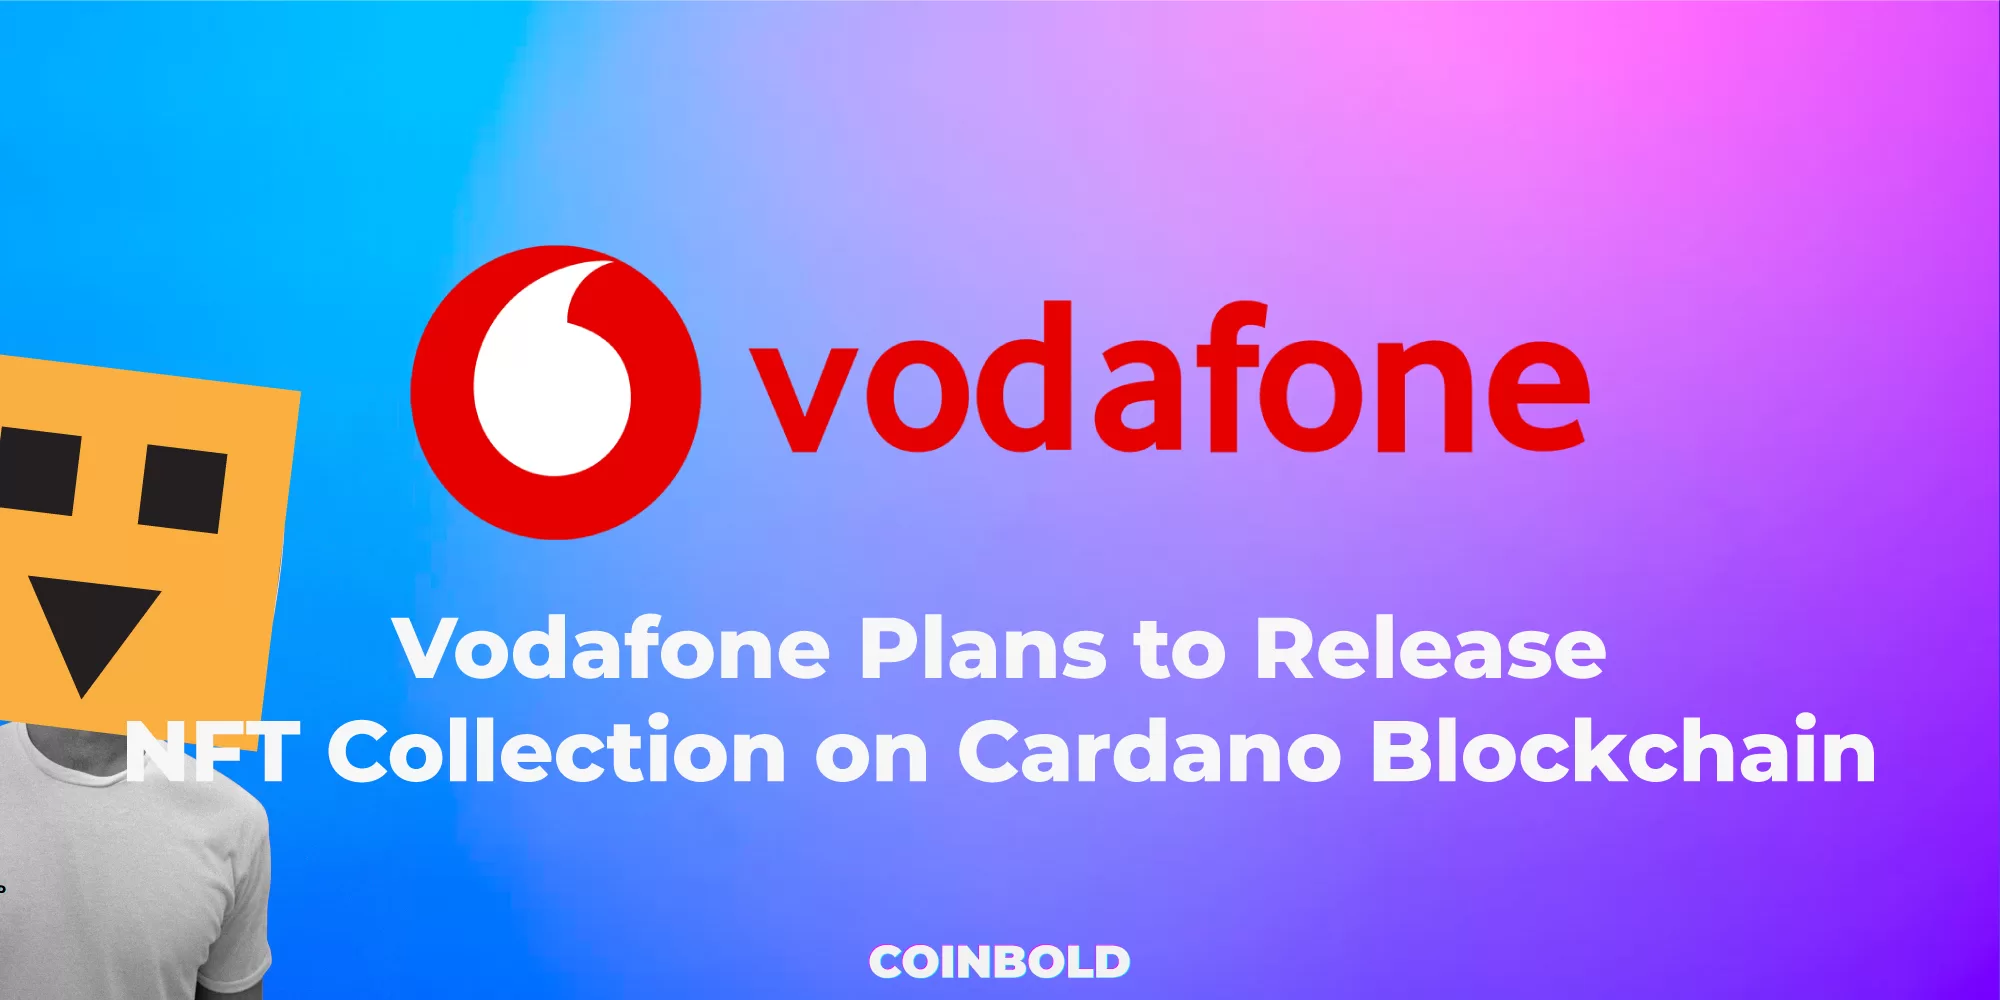 Vodafone Plans to Release NFT Collection on Cardano Blockchain